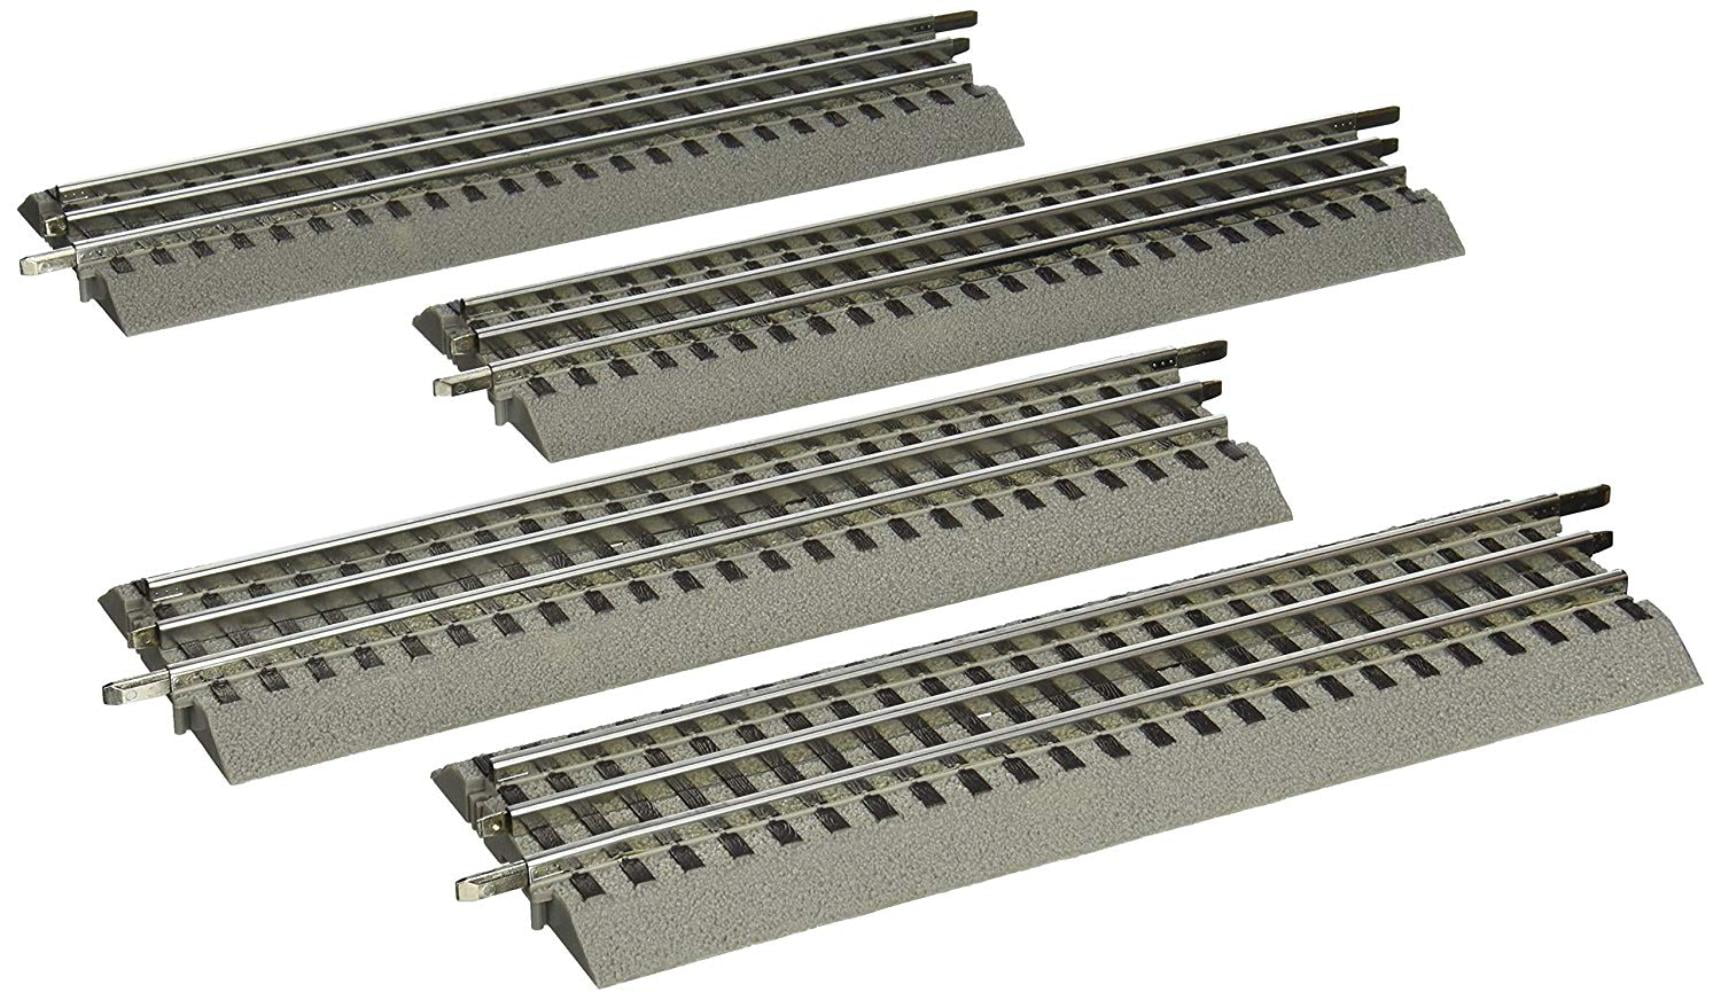 FasTrack Lionel Straight Track 4 Pack for sale online 